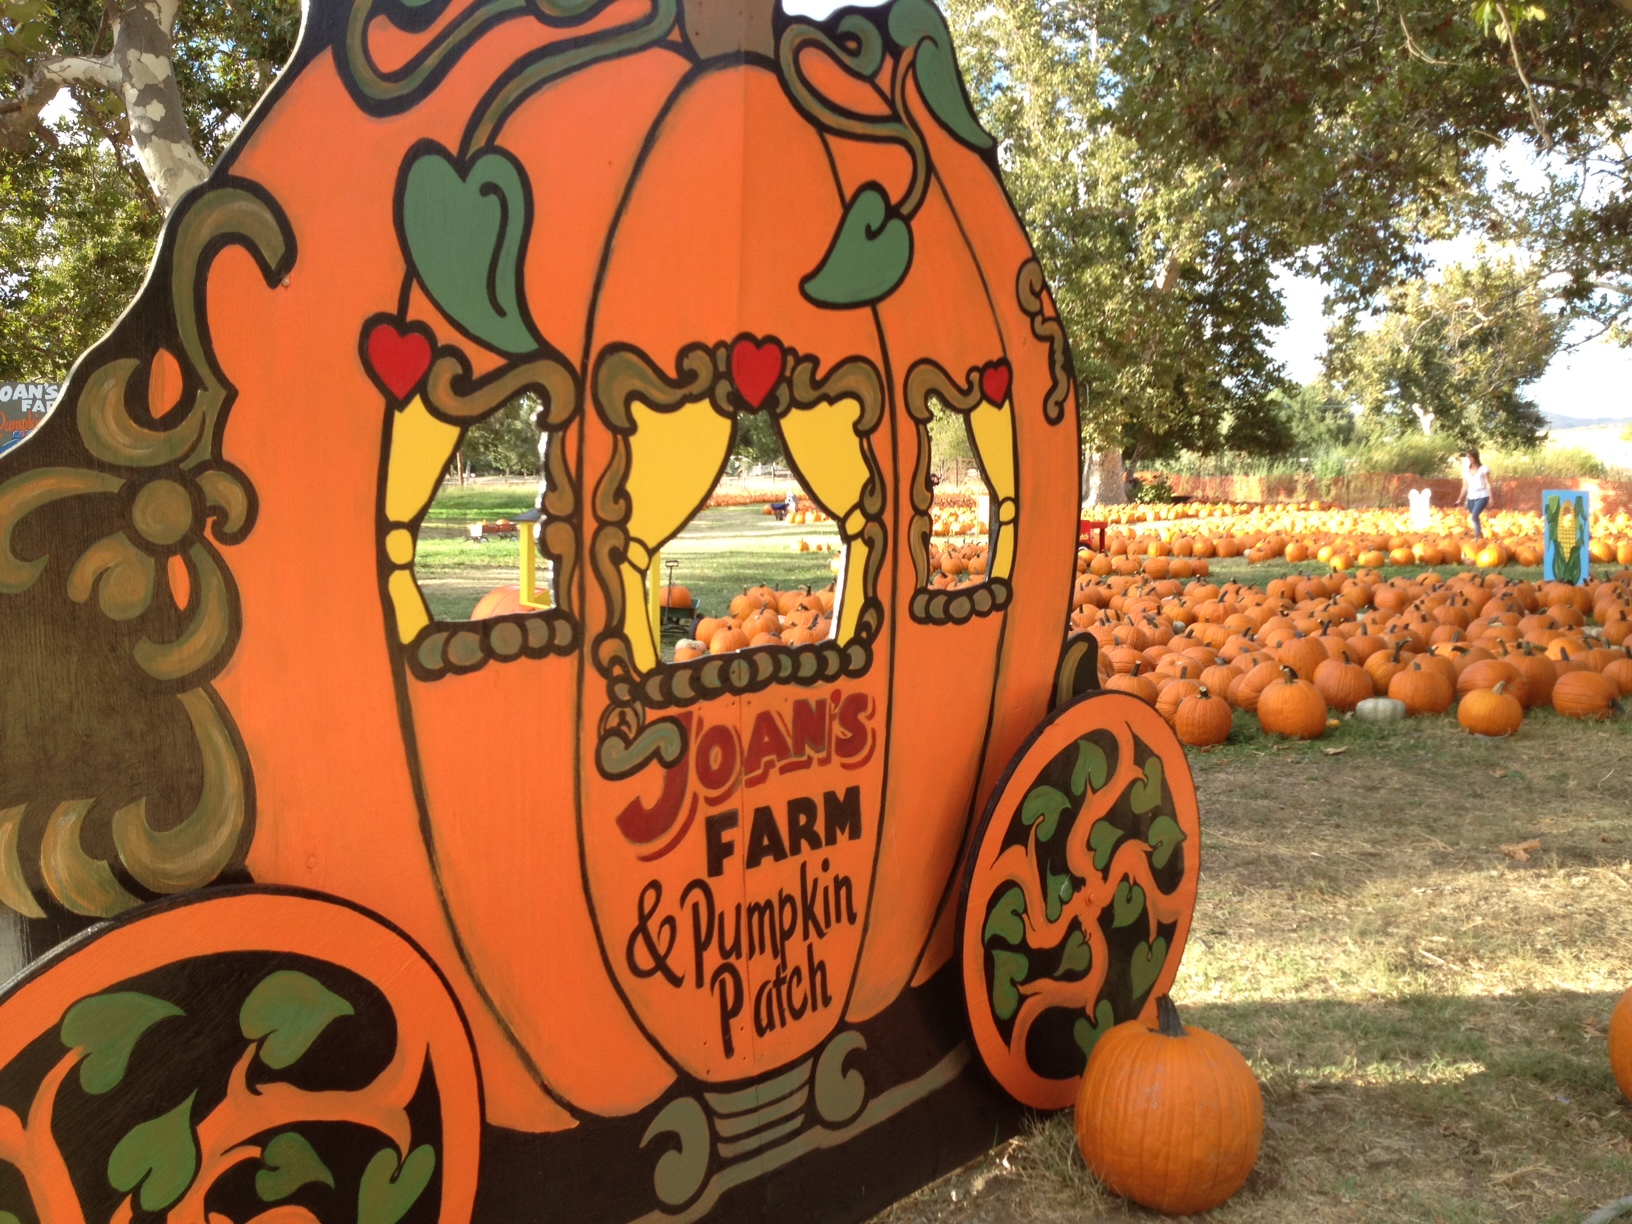 Home - Joan's Farm and Pumpkin Patch.